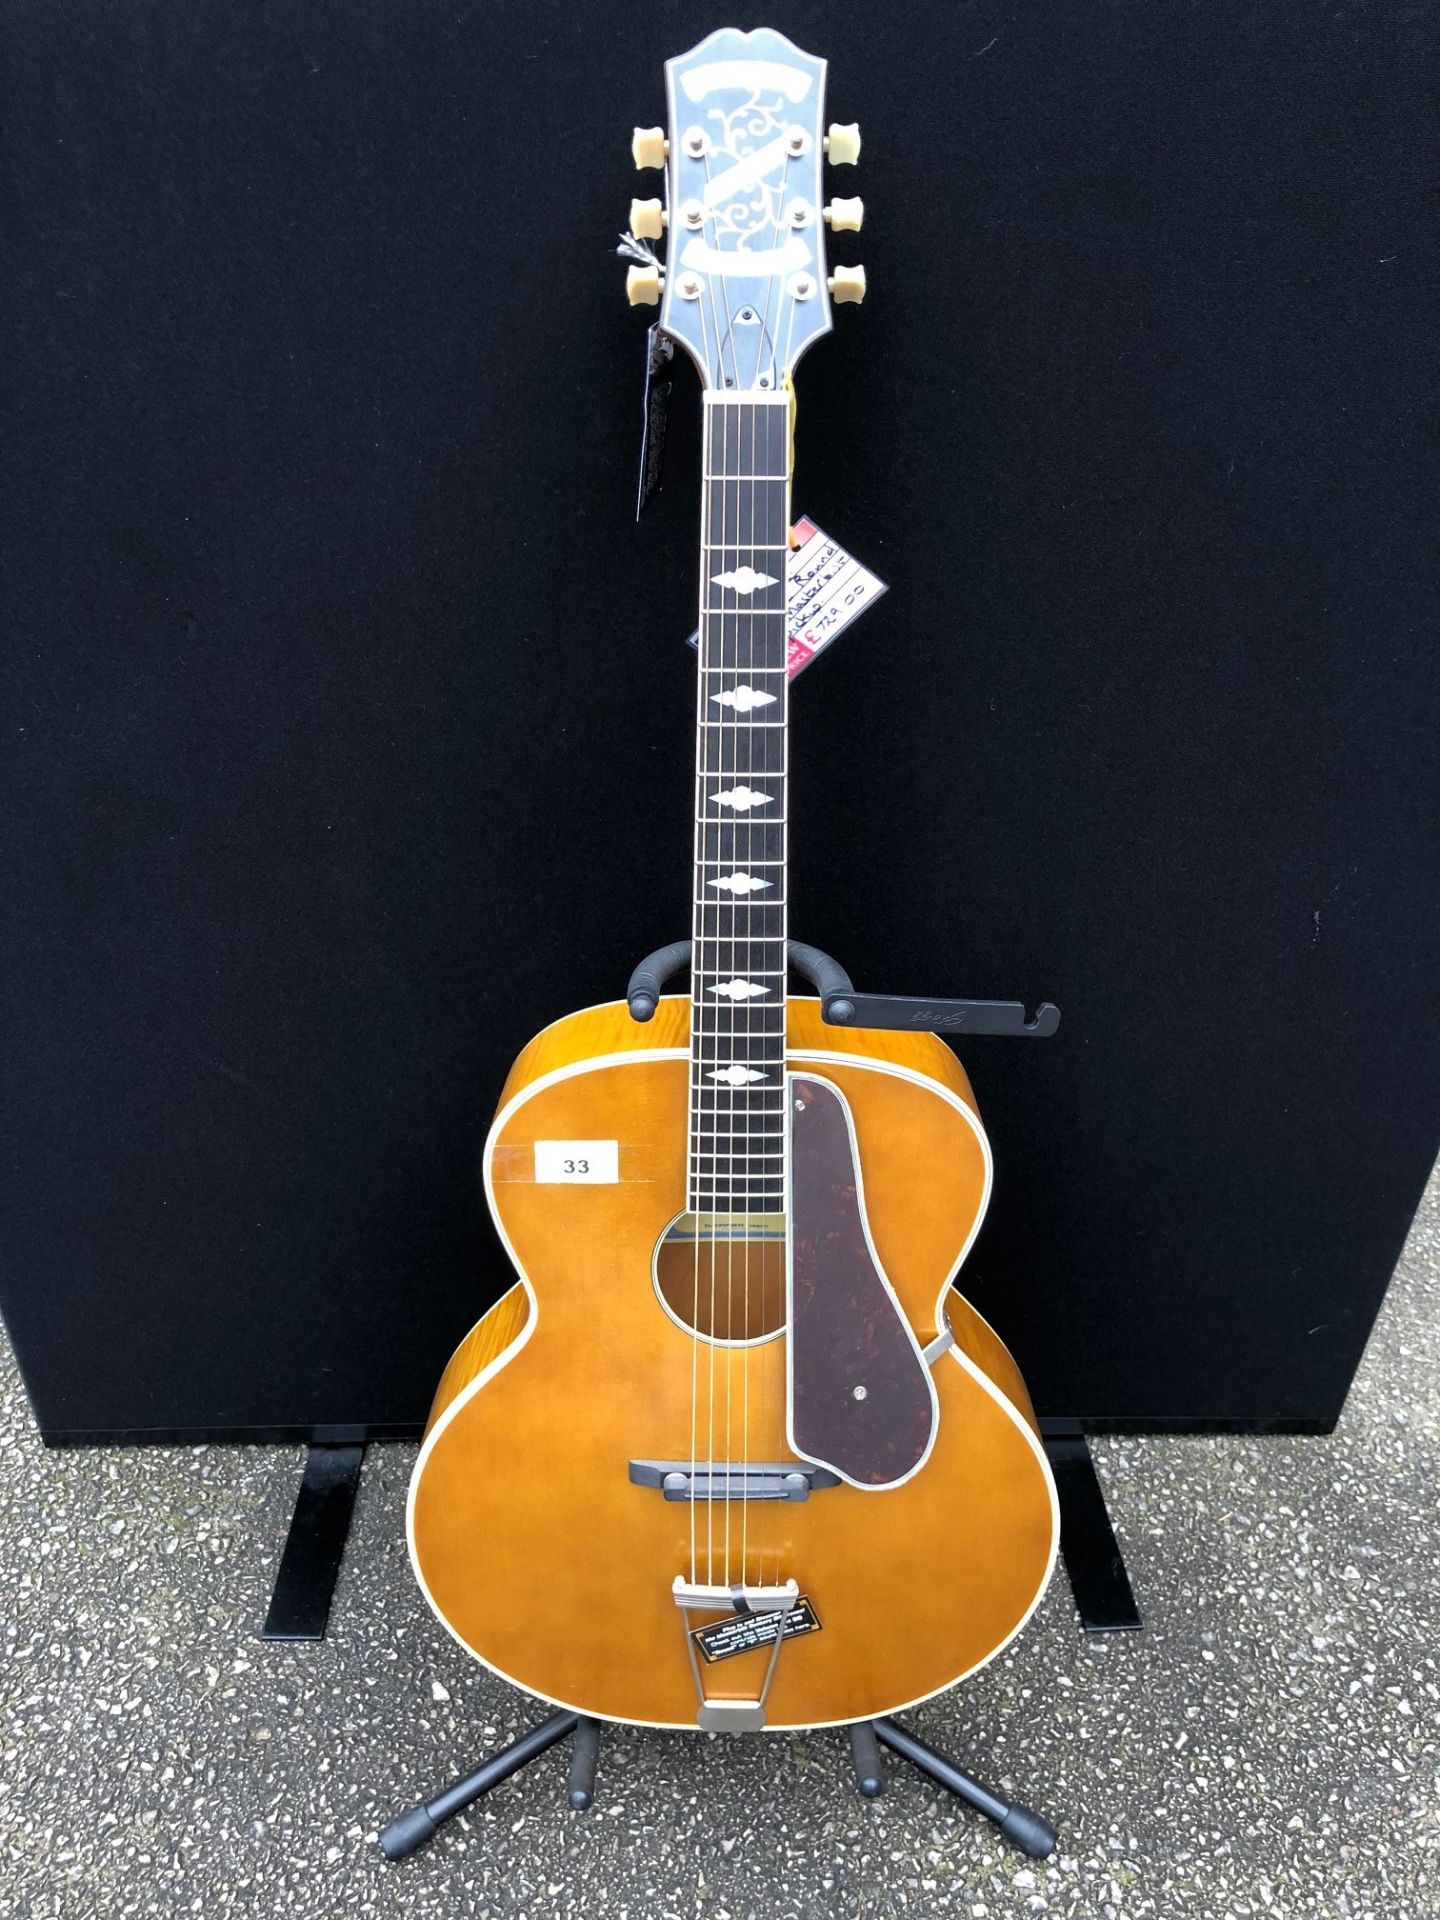 Epiphone Deluxe Round Hole Masterbilt Electro Acoustic Guitar (Brand New Ex Display - RRP £729.00)